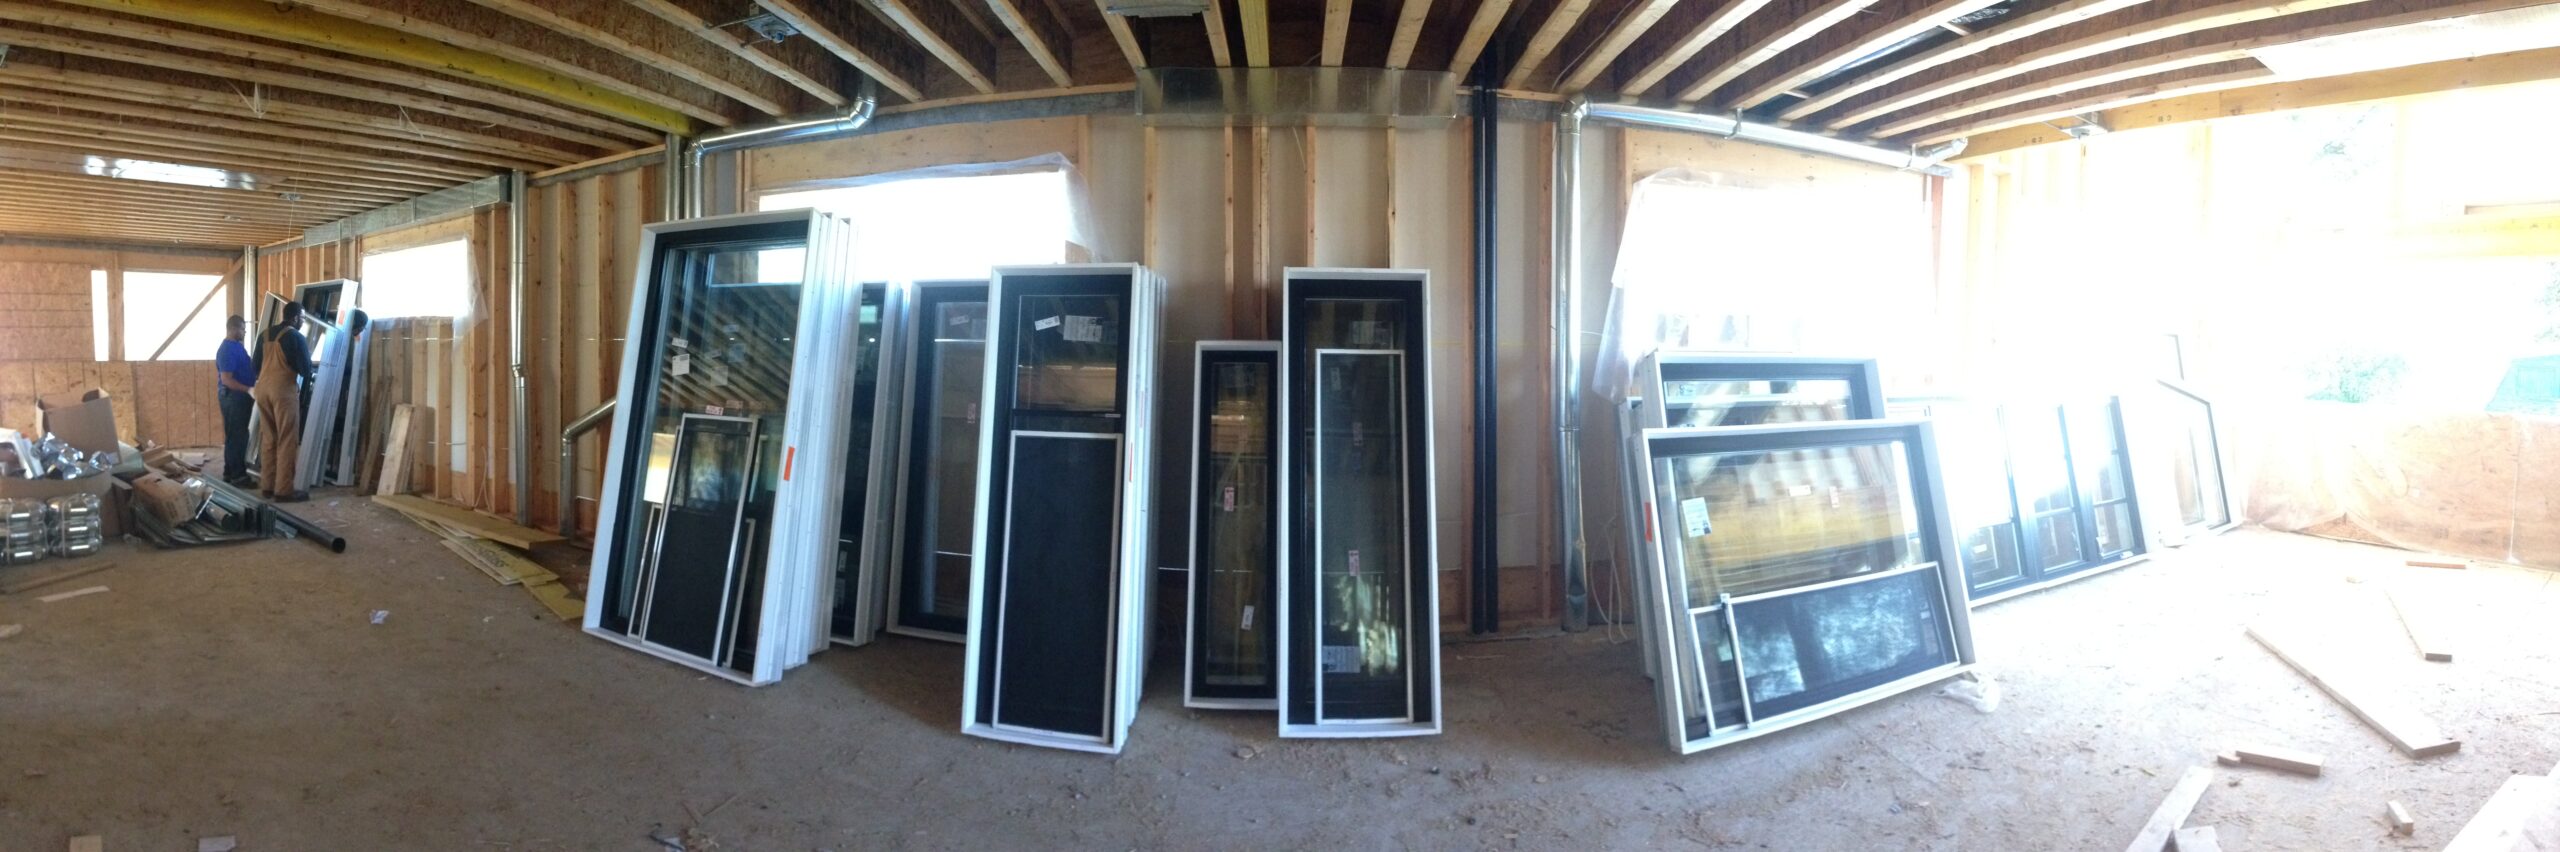 Our windows are here!